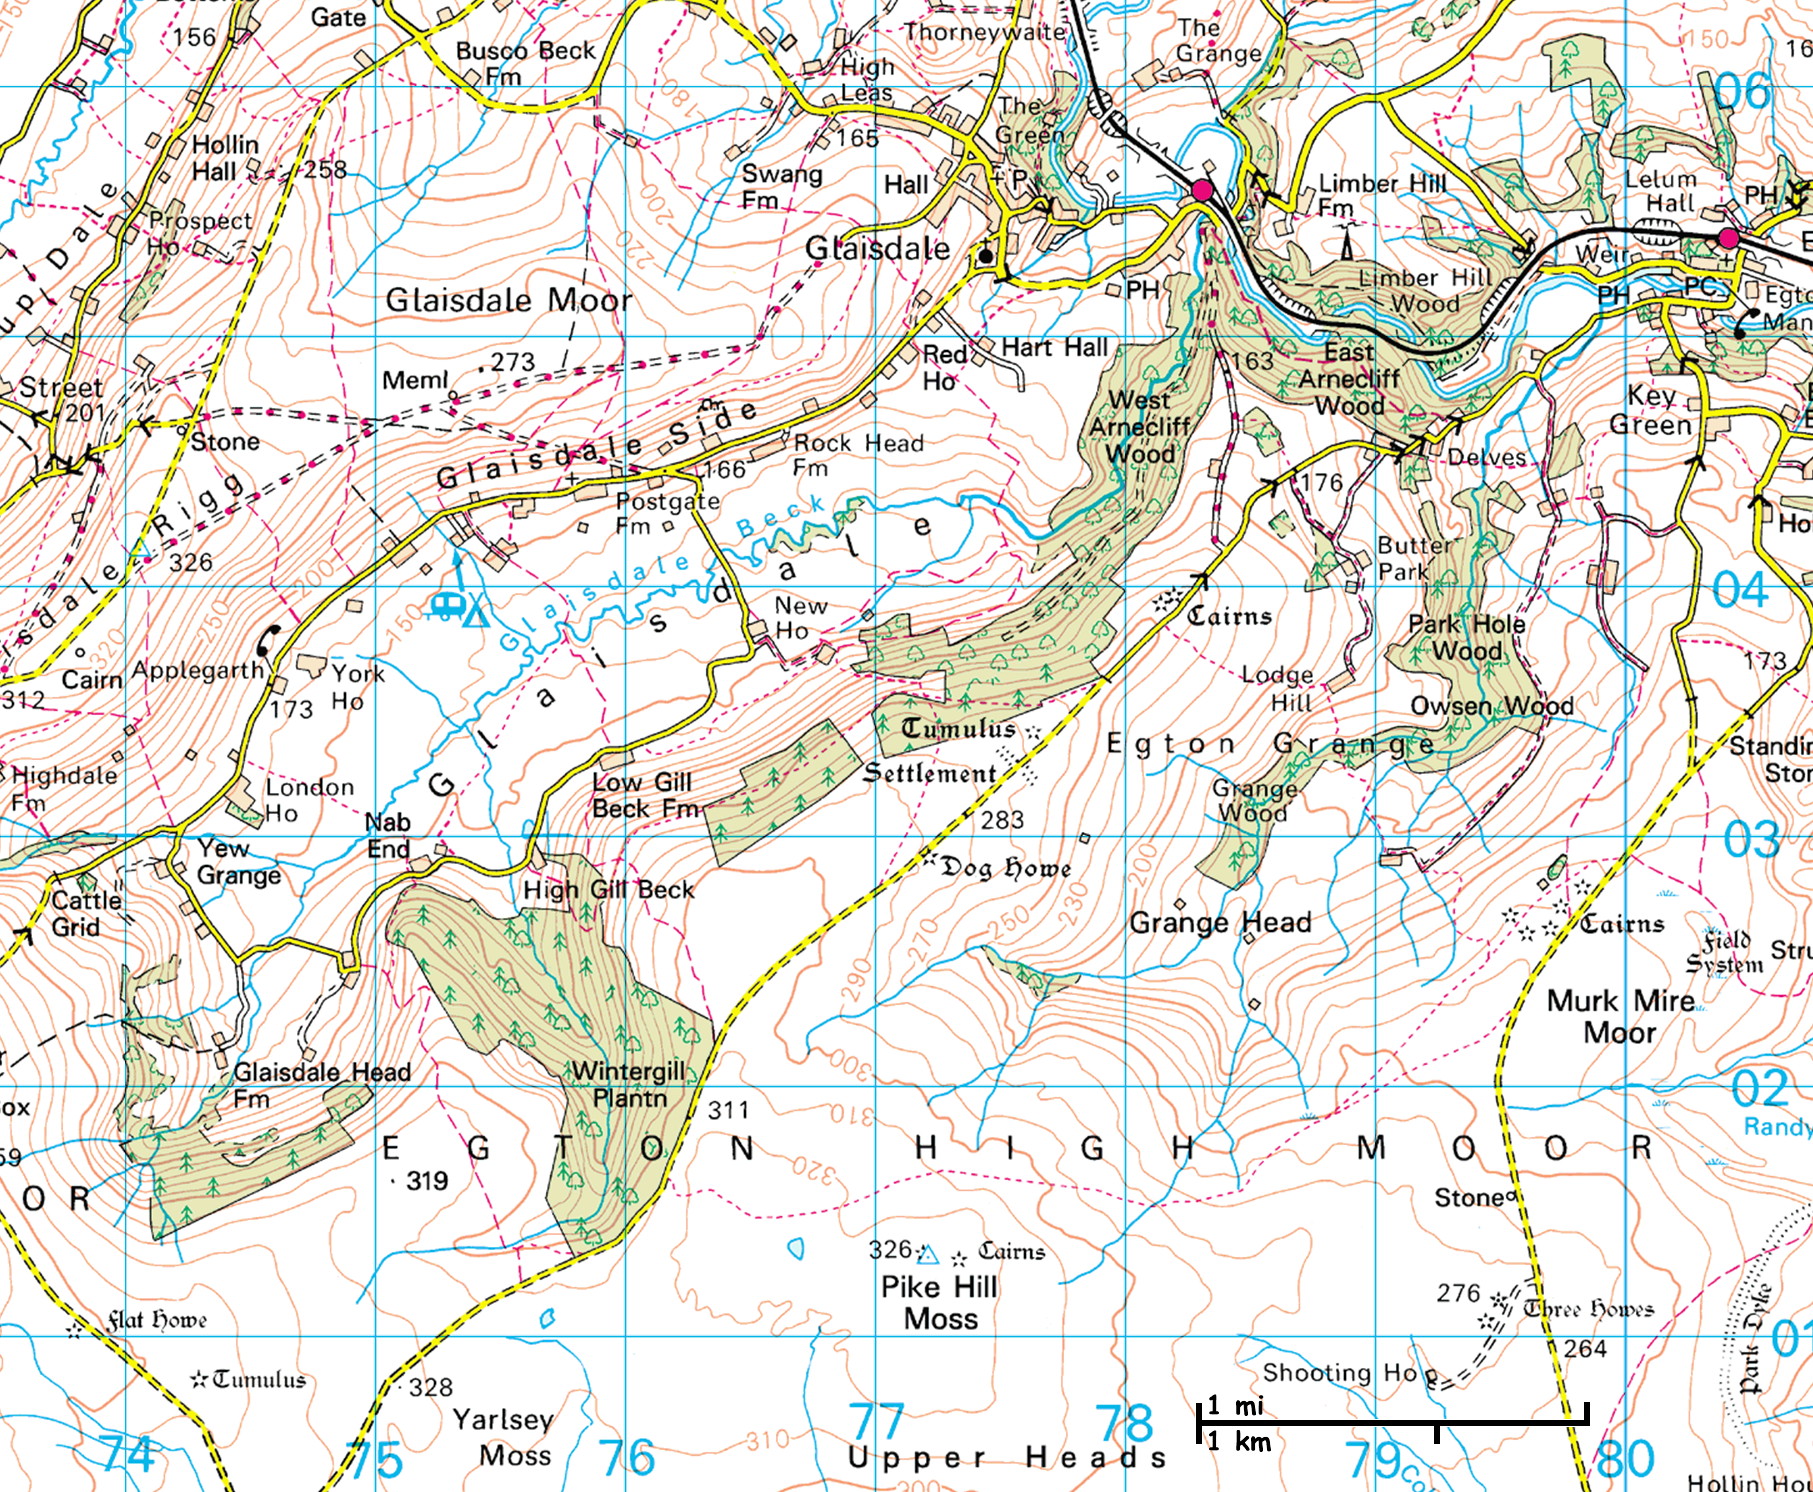 Ordnance Survey map of area south-west of Glaisdale